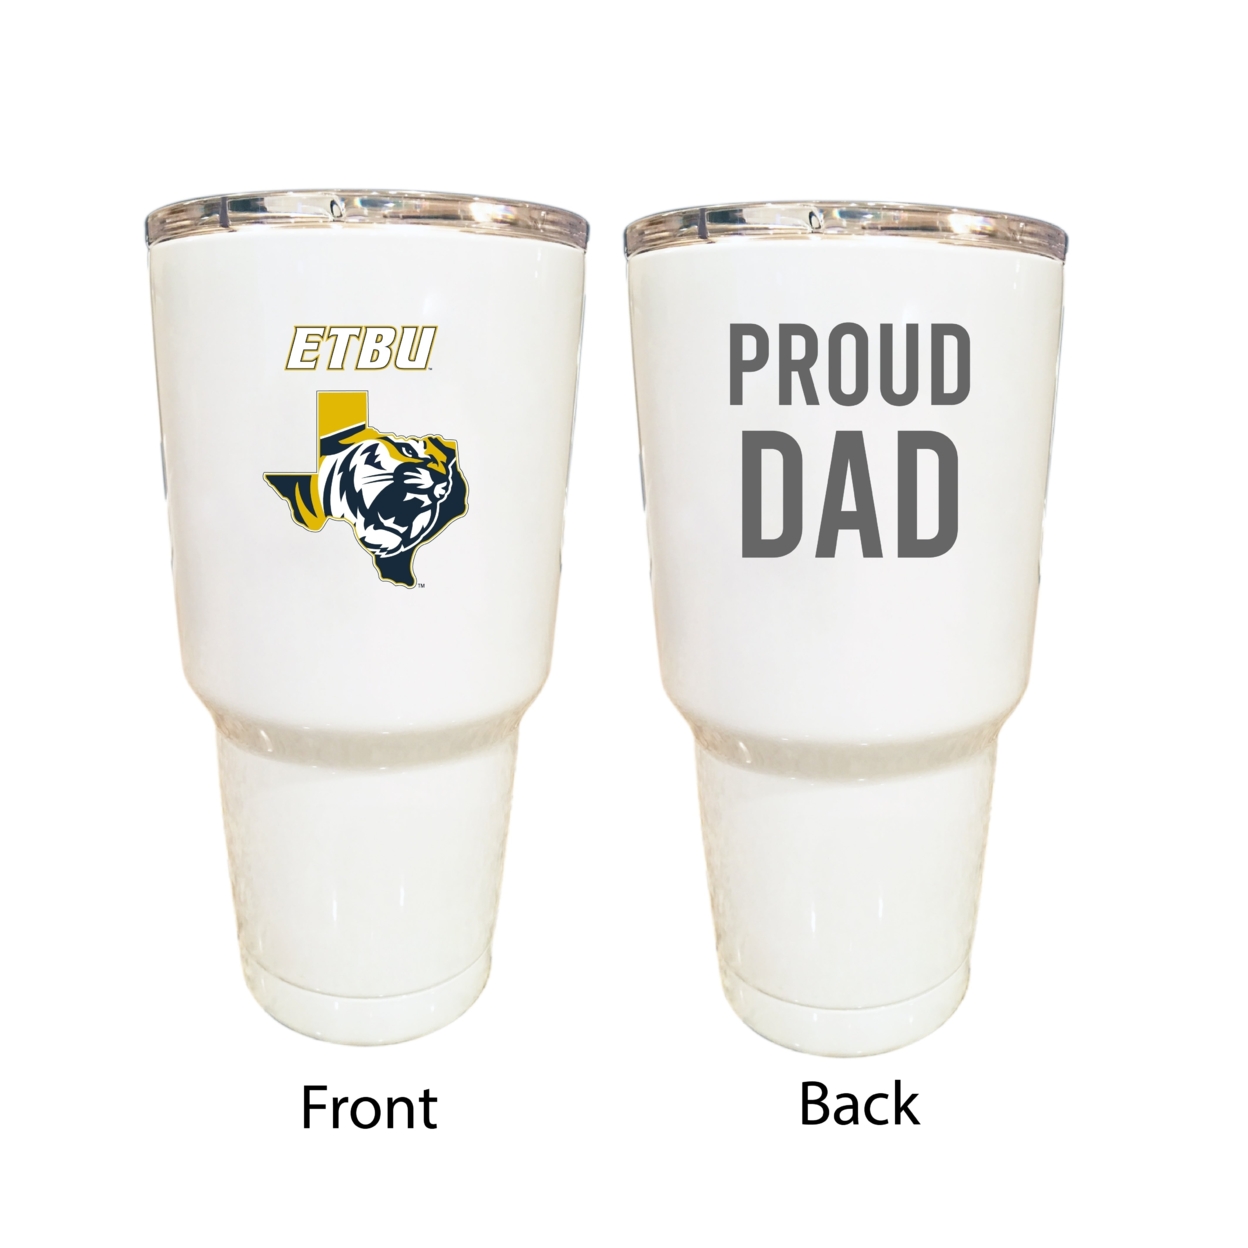 East Texas Baptist University Proud Dad 24 Oz Insulated Stainless Steel Tumblers Choose Your Color.